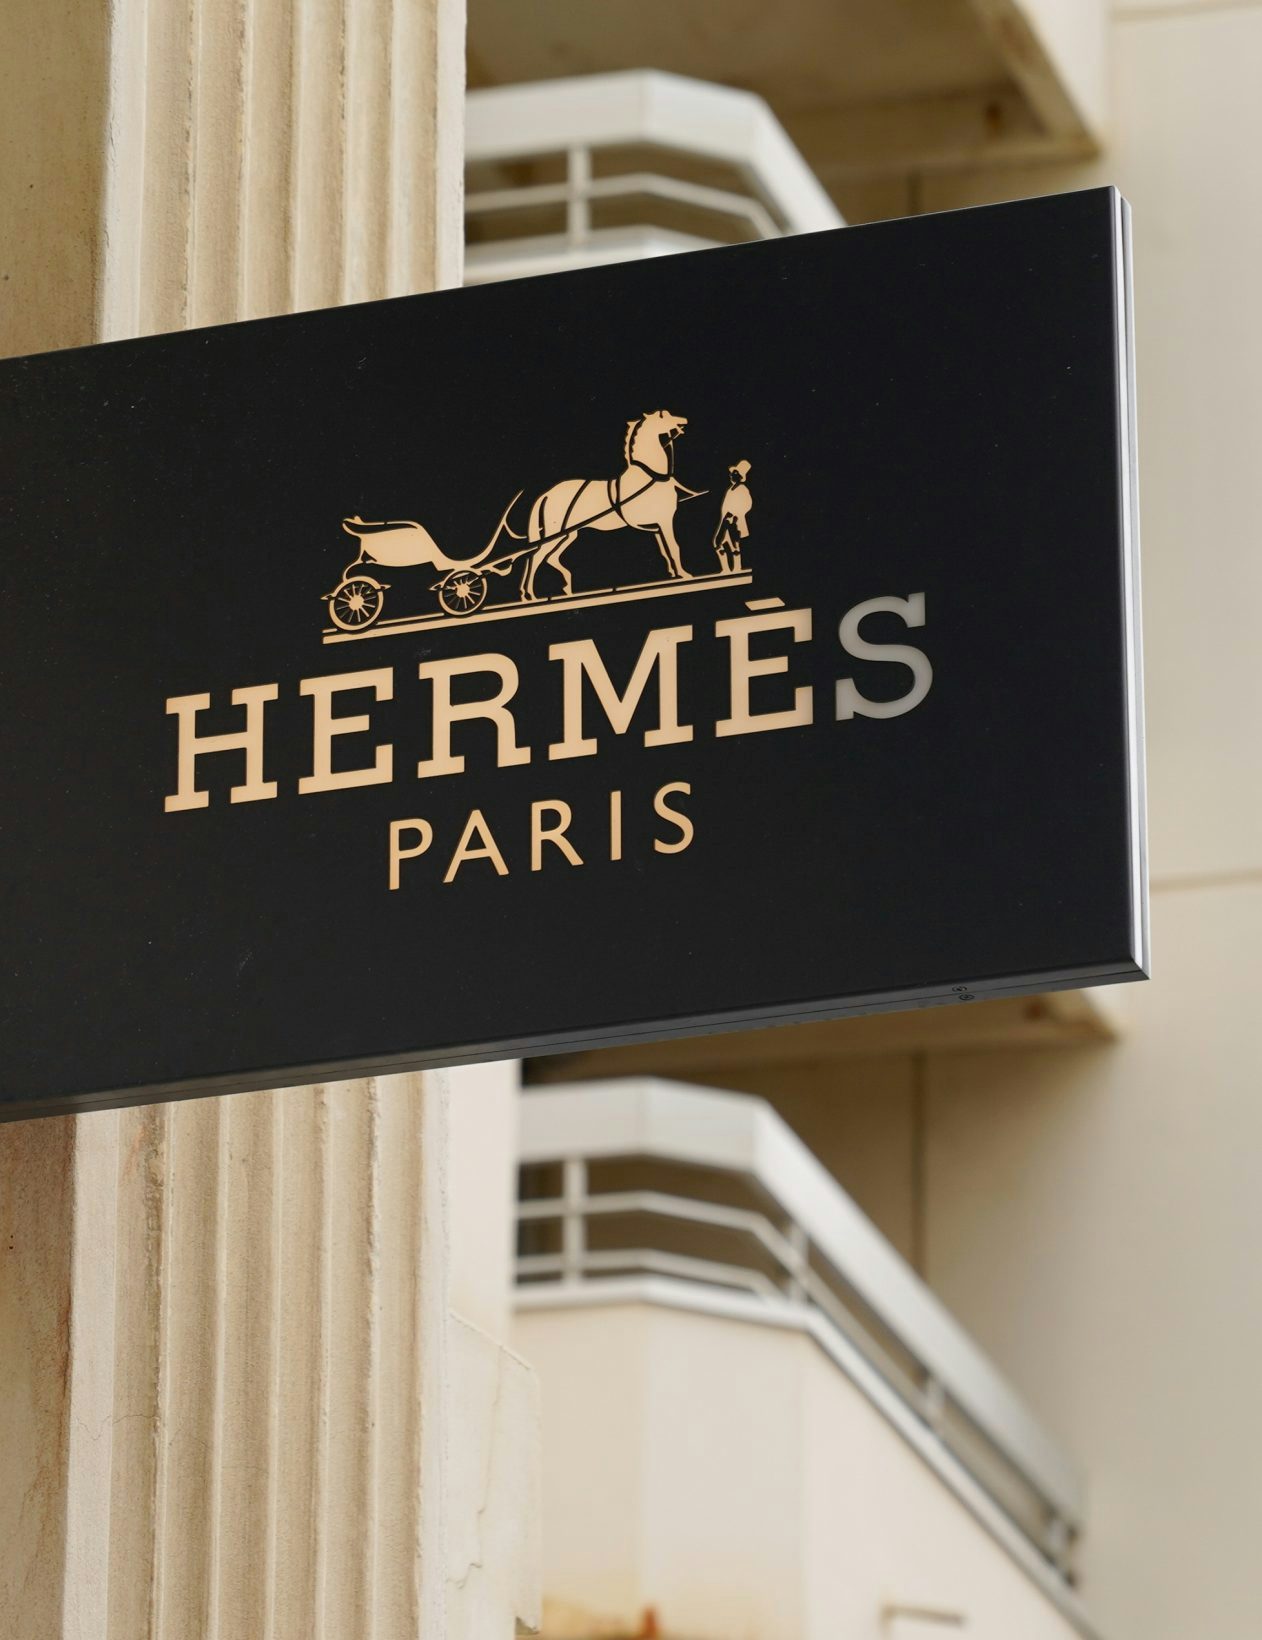 Hermès wins the Transparency Award 2022, all categories